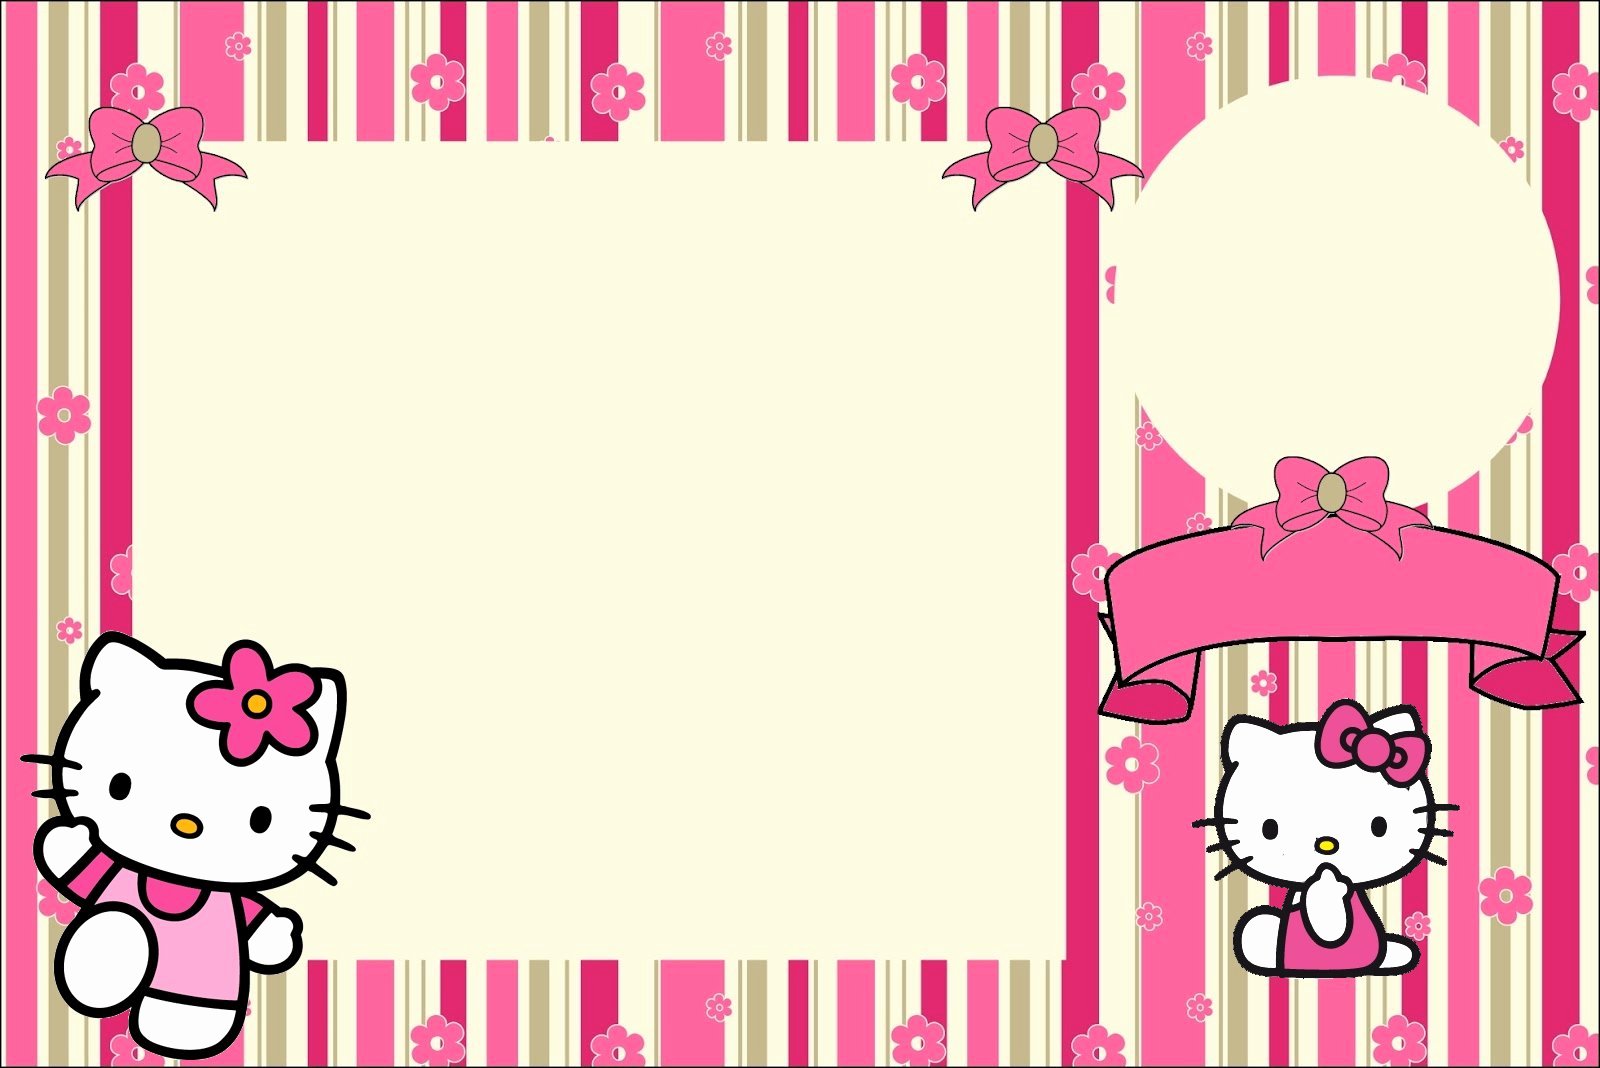 Hello Kitty Invitation Card Awesome Hello Kitty with Flowers Free Printable Invitations Oh